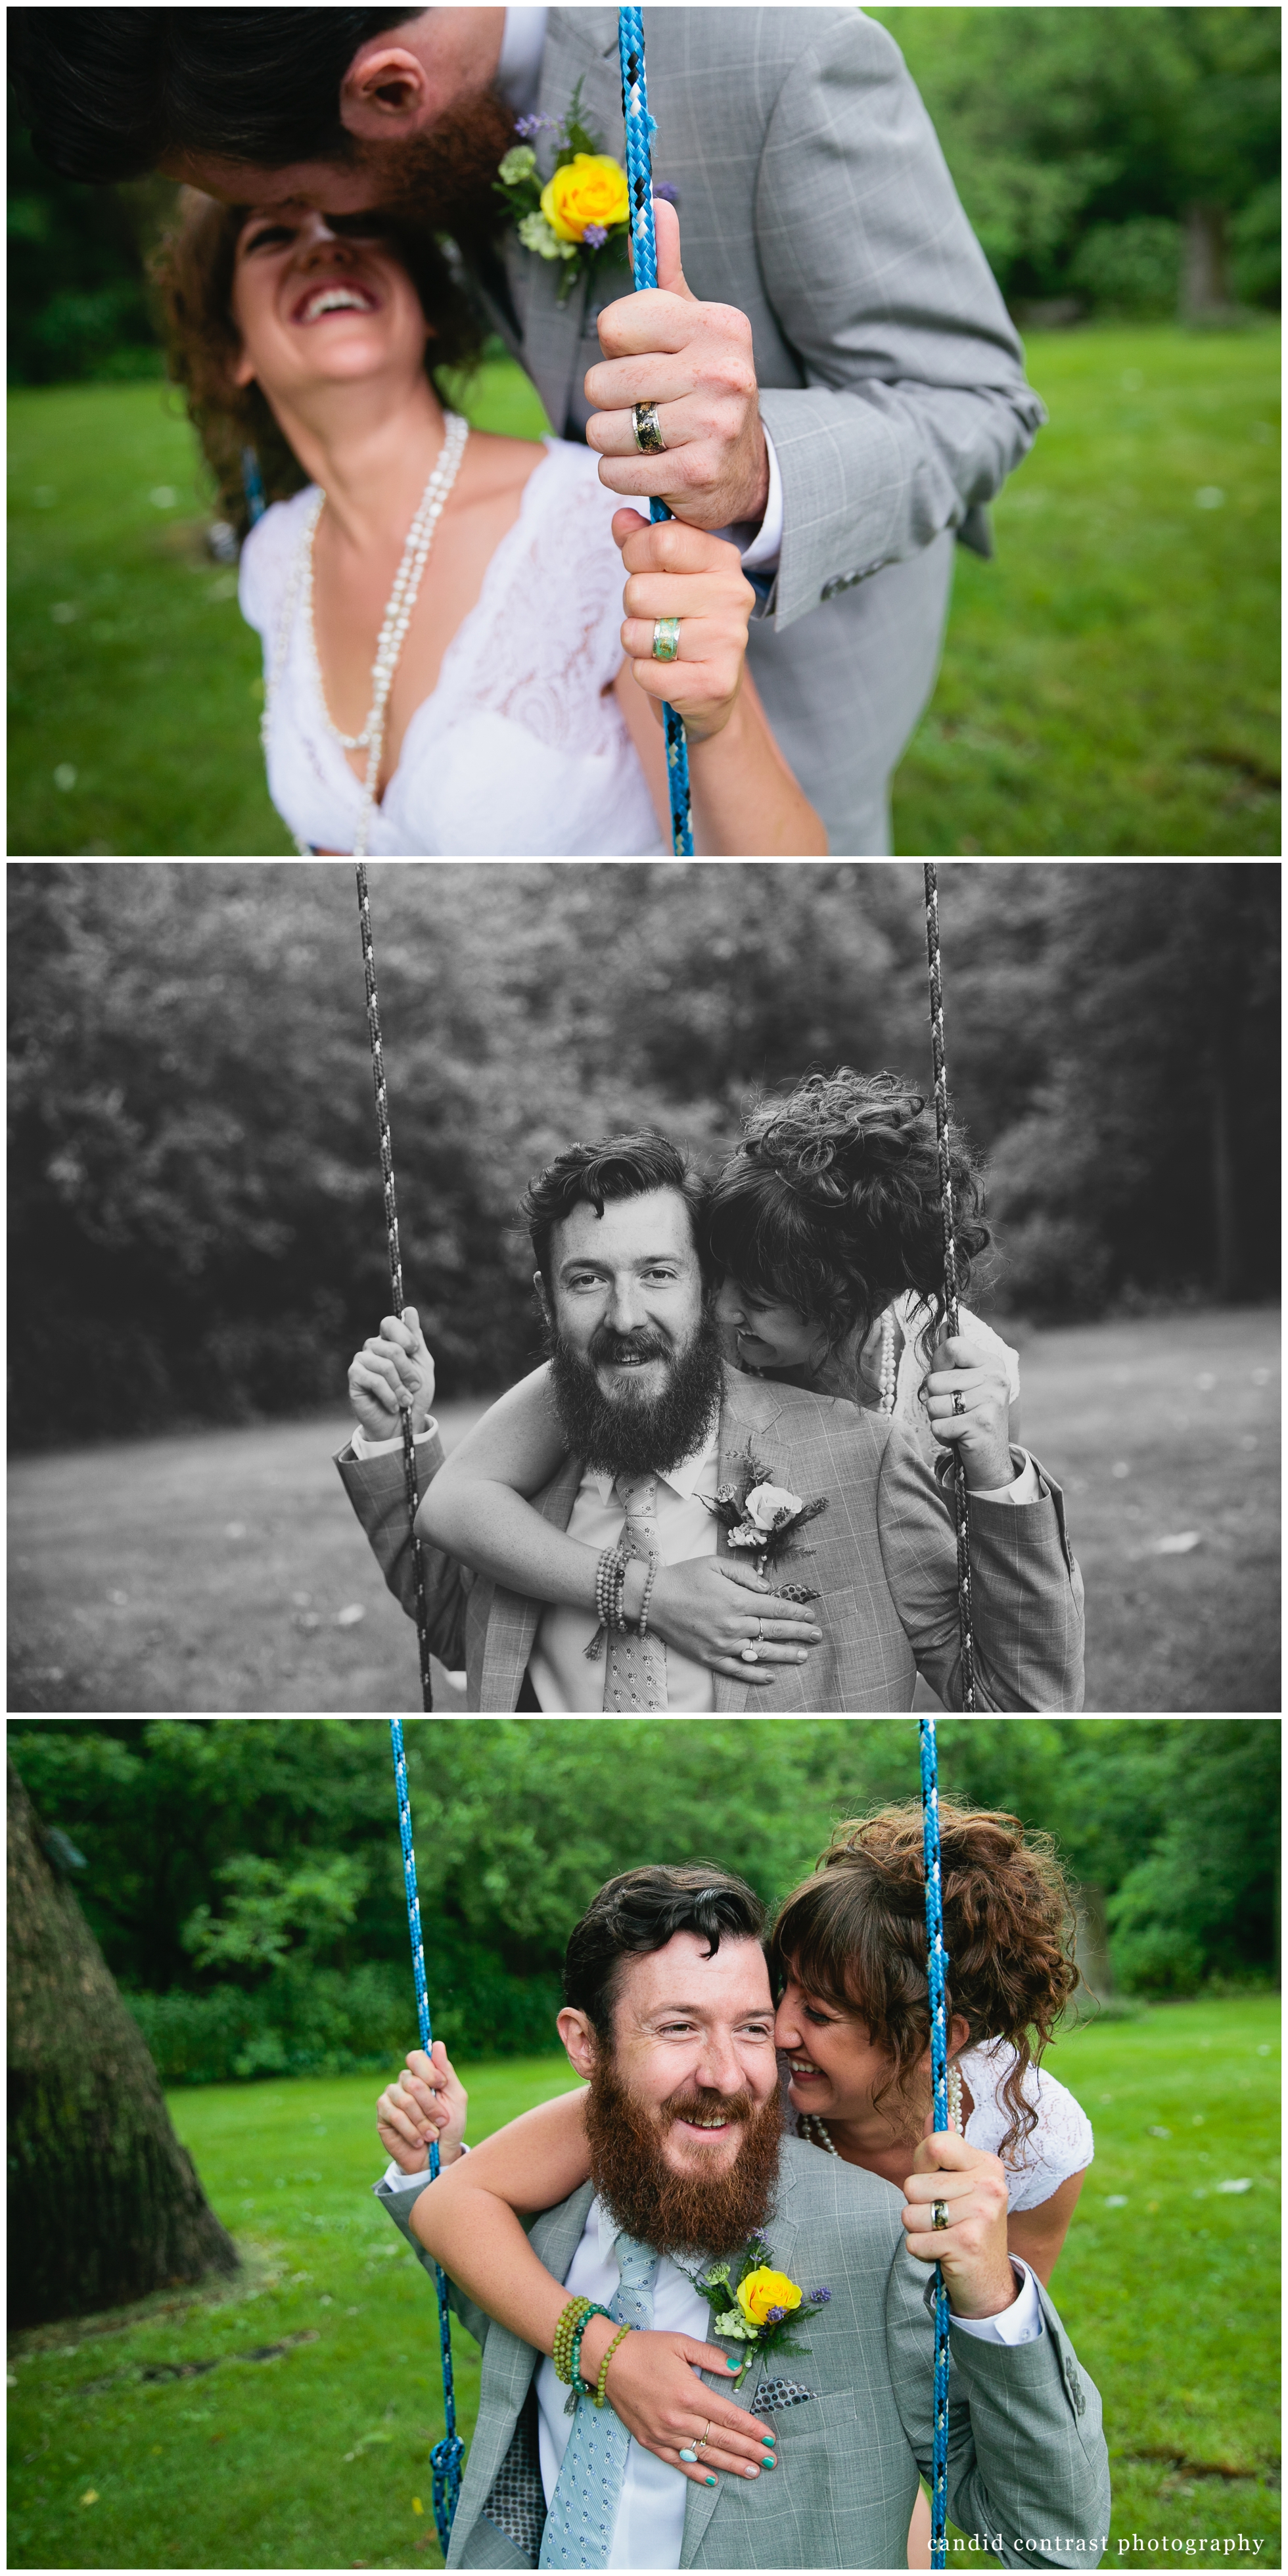 modern bride and groom portraits at backyard wedding in dubuque, ia, candid contrast photography